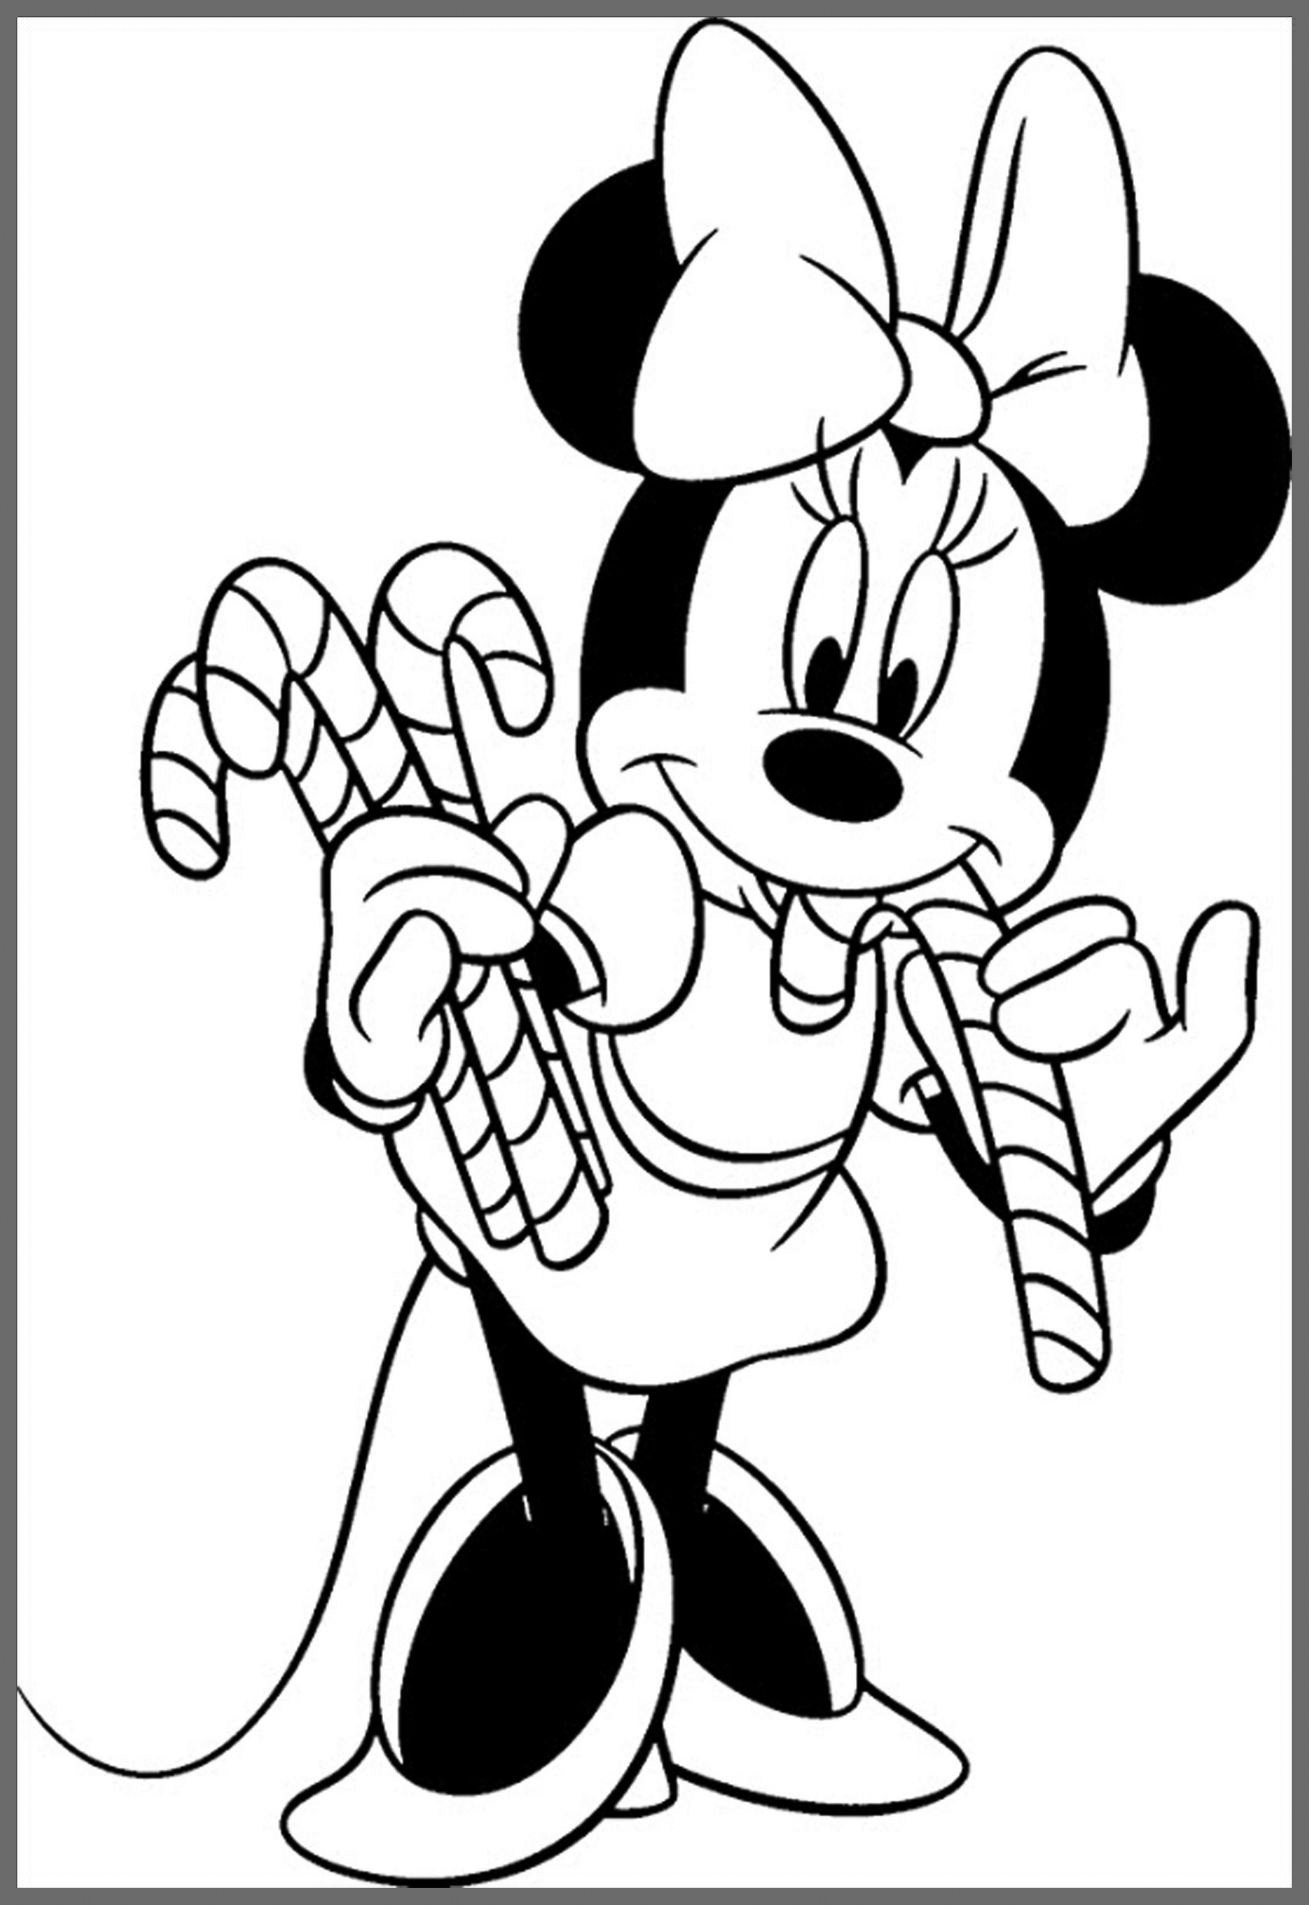 Mickey Mouse Christmas Coloring Pages - Best Coloring ...